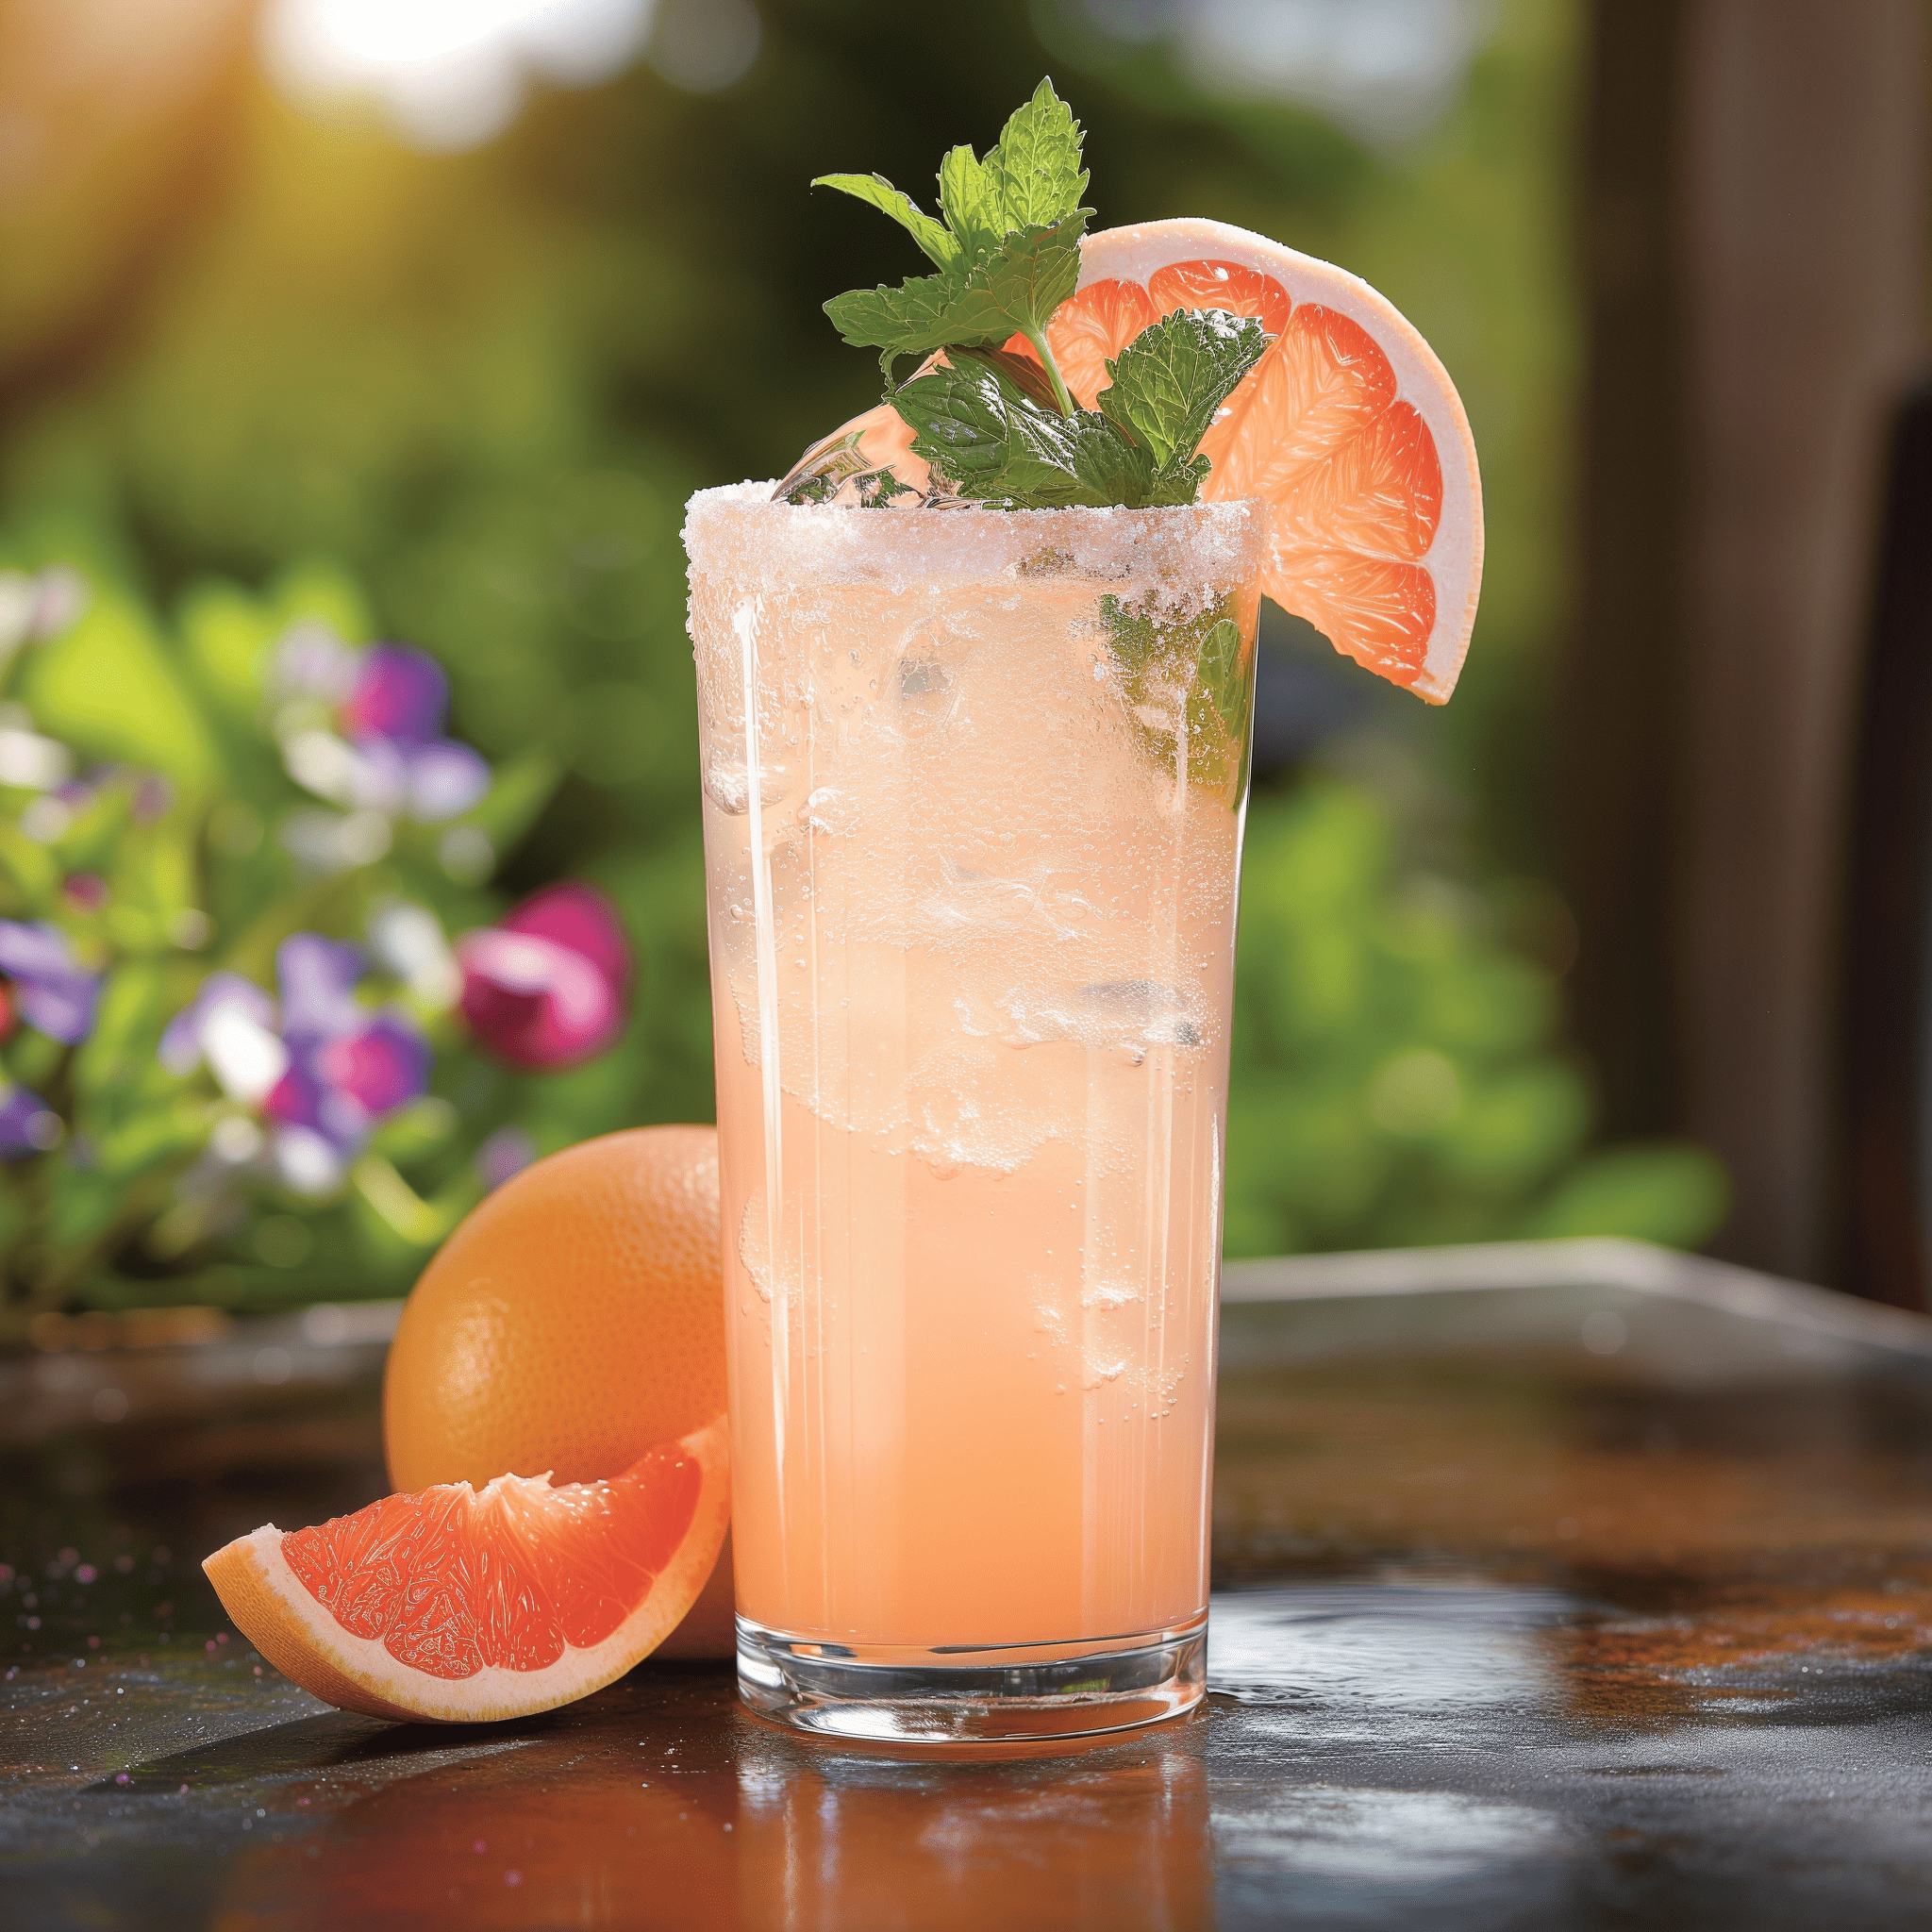 Grapefruit Rickey Cocktail Recipe - The Grapefruit Rickey offers a harmonious blend of tart and sweet flavors, with the grapefruit juice providing a zesty punch that's mellowed by the botanical notes of gin. The carbonation from the seltzer adds a lively effervescence, making it a light and refreshing choice.